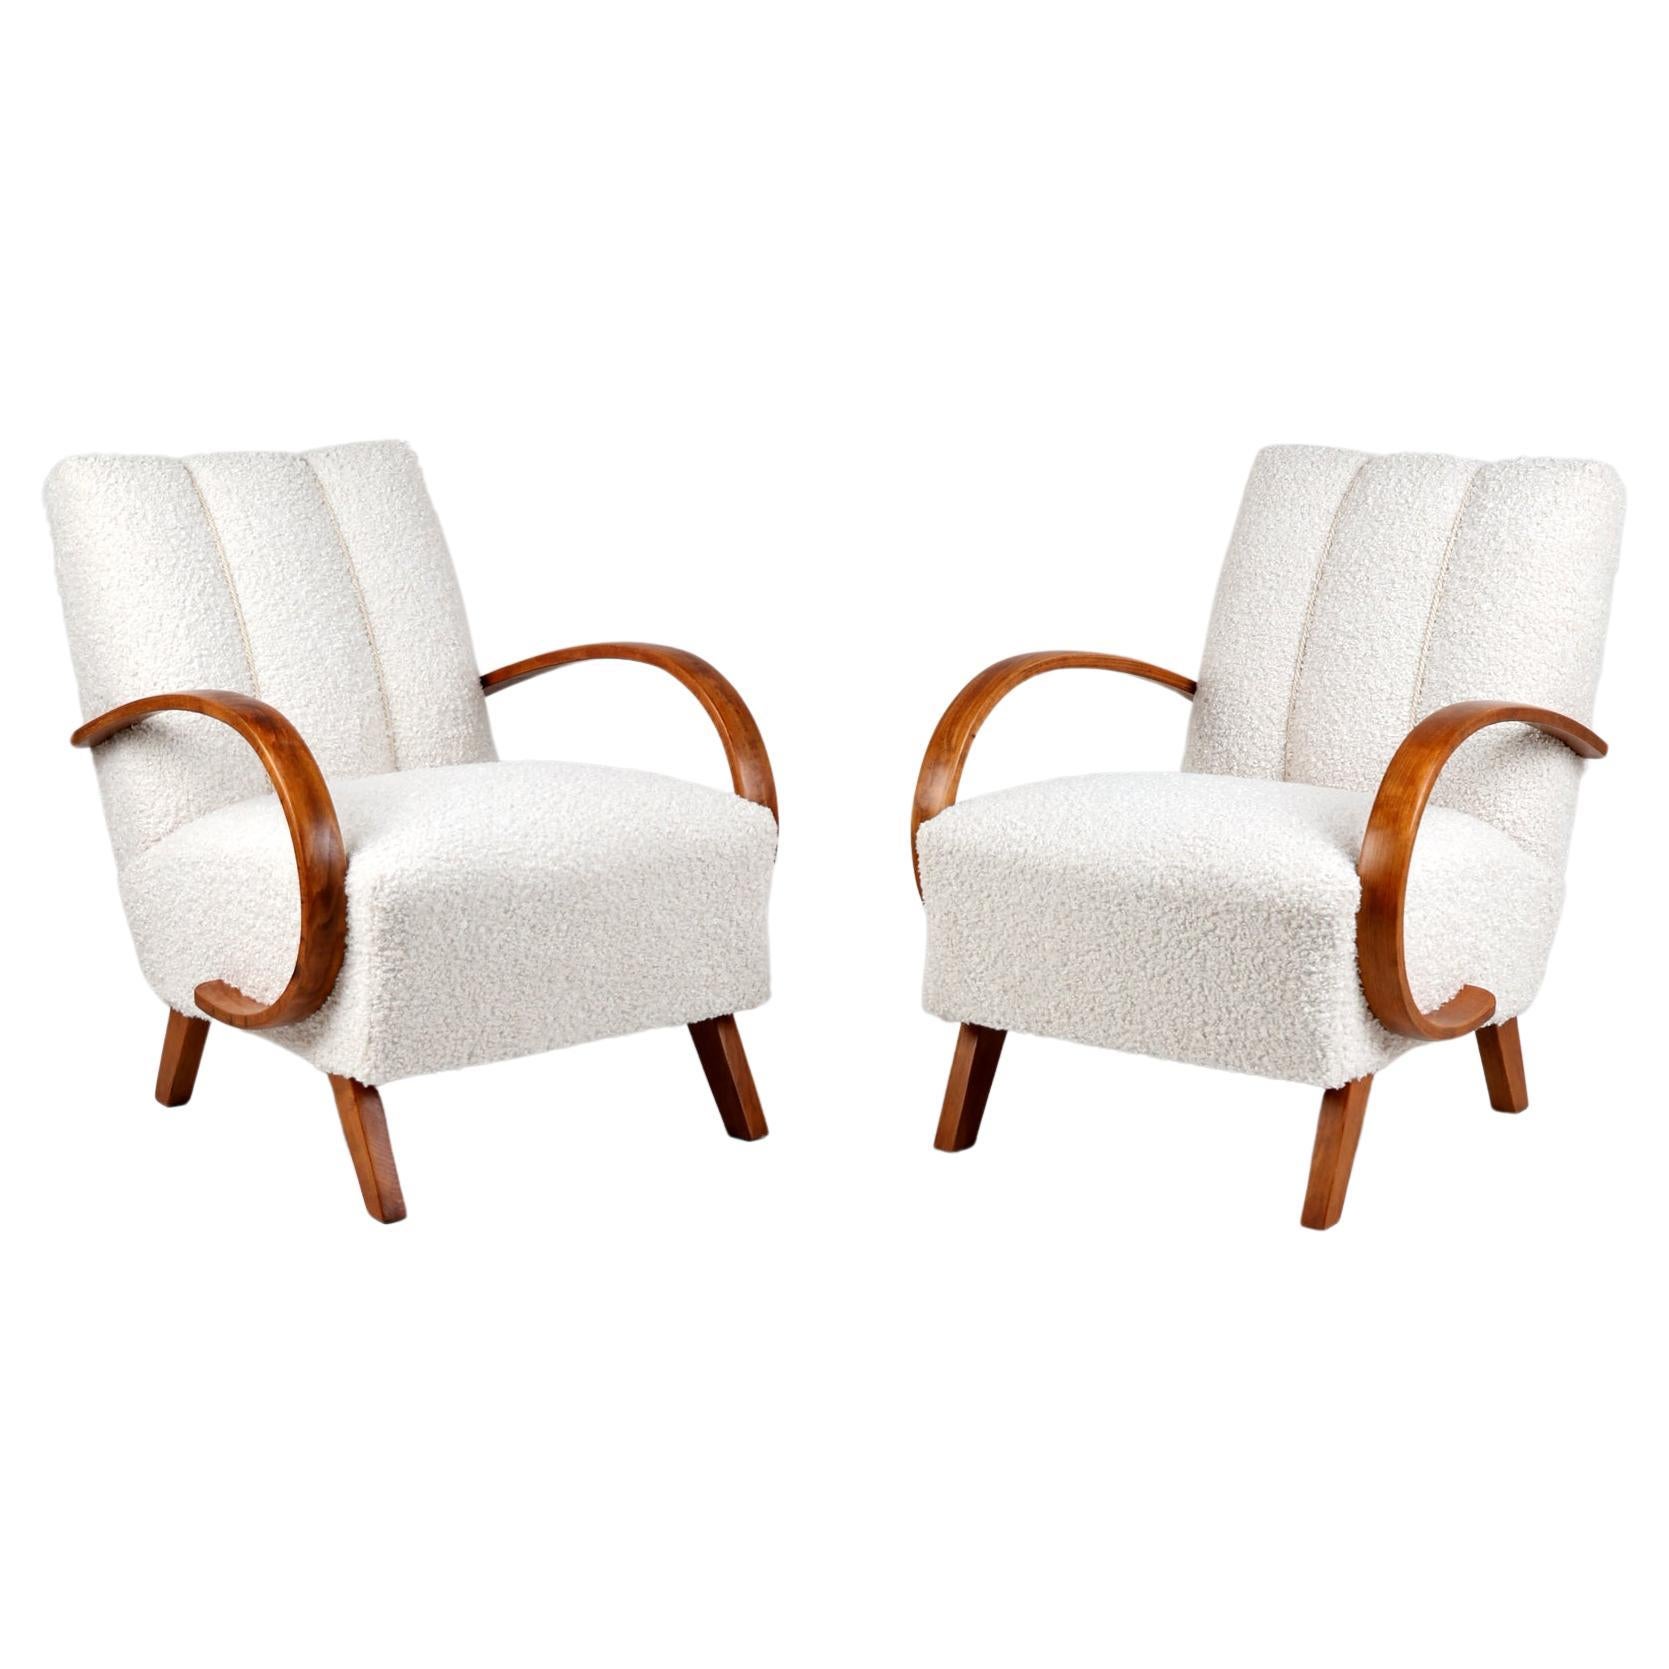 A pair of Armchairs H-410 by Jindrich Halabala from the 1950s For Sale